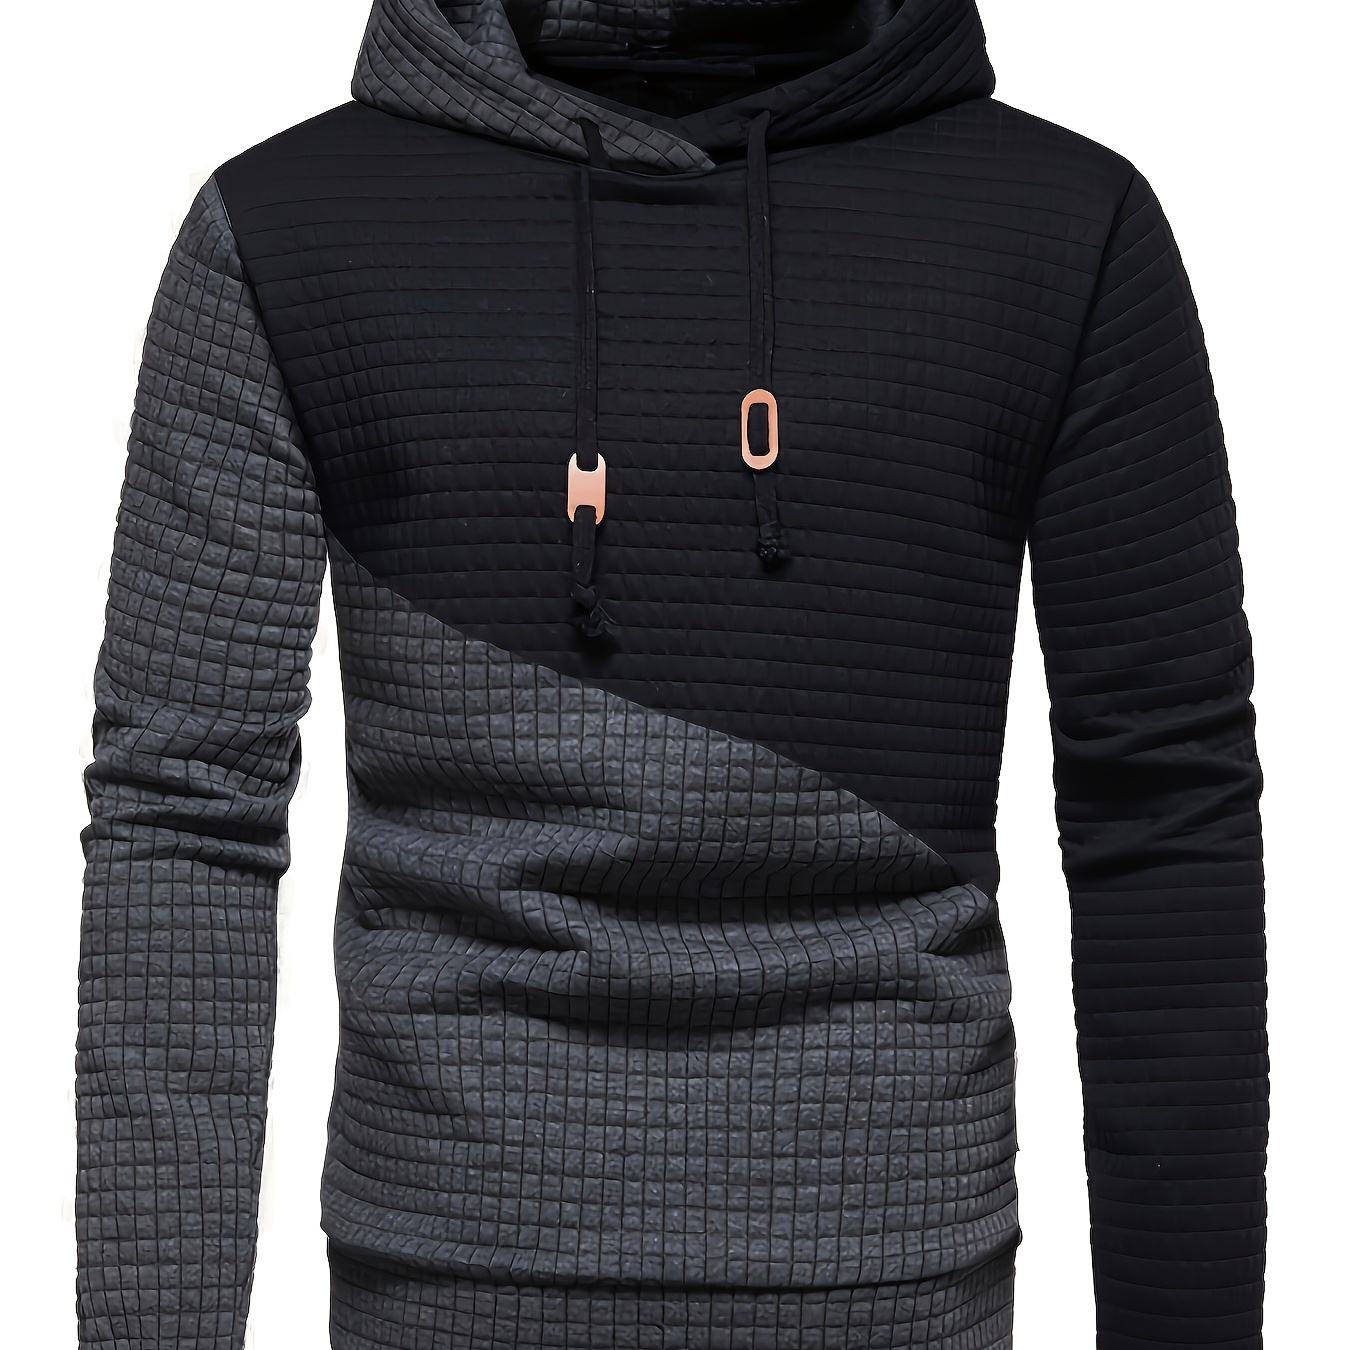 

Cool Waffle Hoodies For Men, Men's Casual Color Block Design Hooded Sweatshirt With Kangaroo Pocket Streetwear For Winter Fall, As Gifts